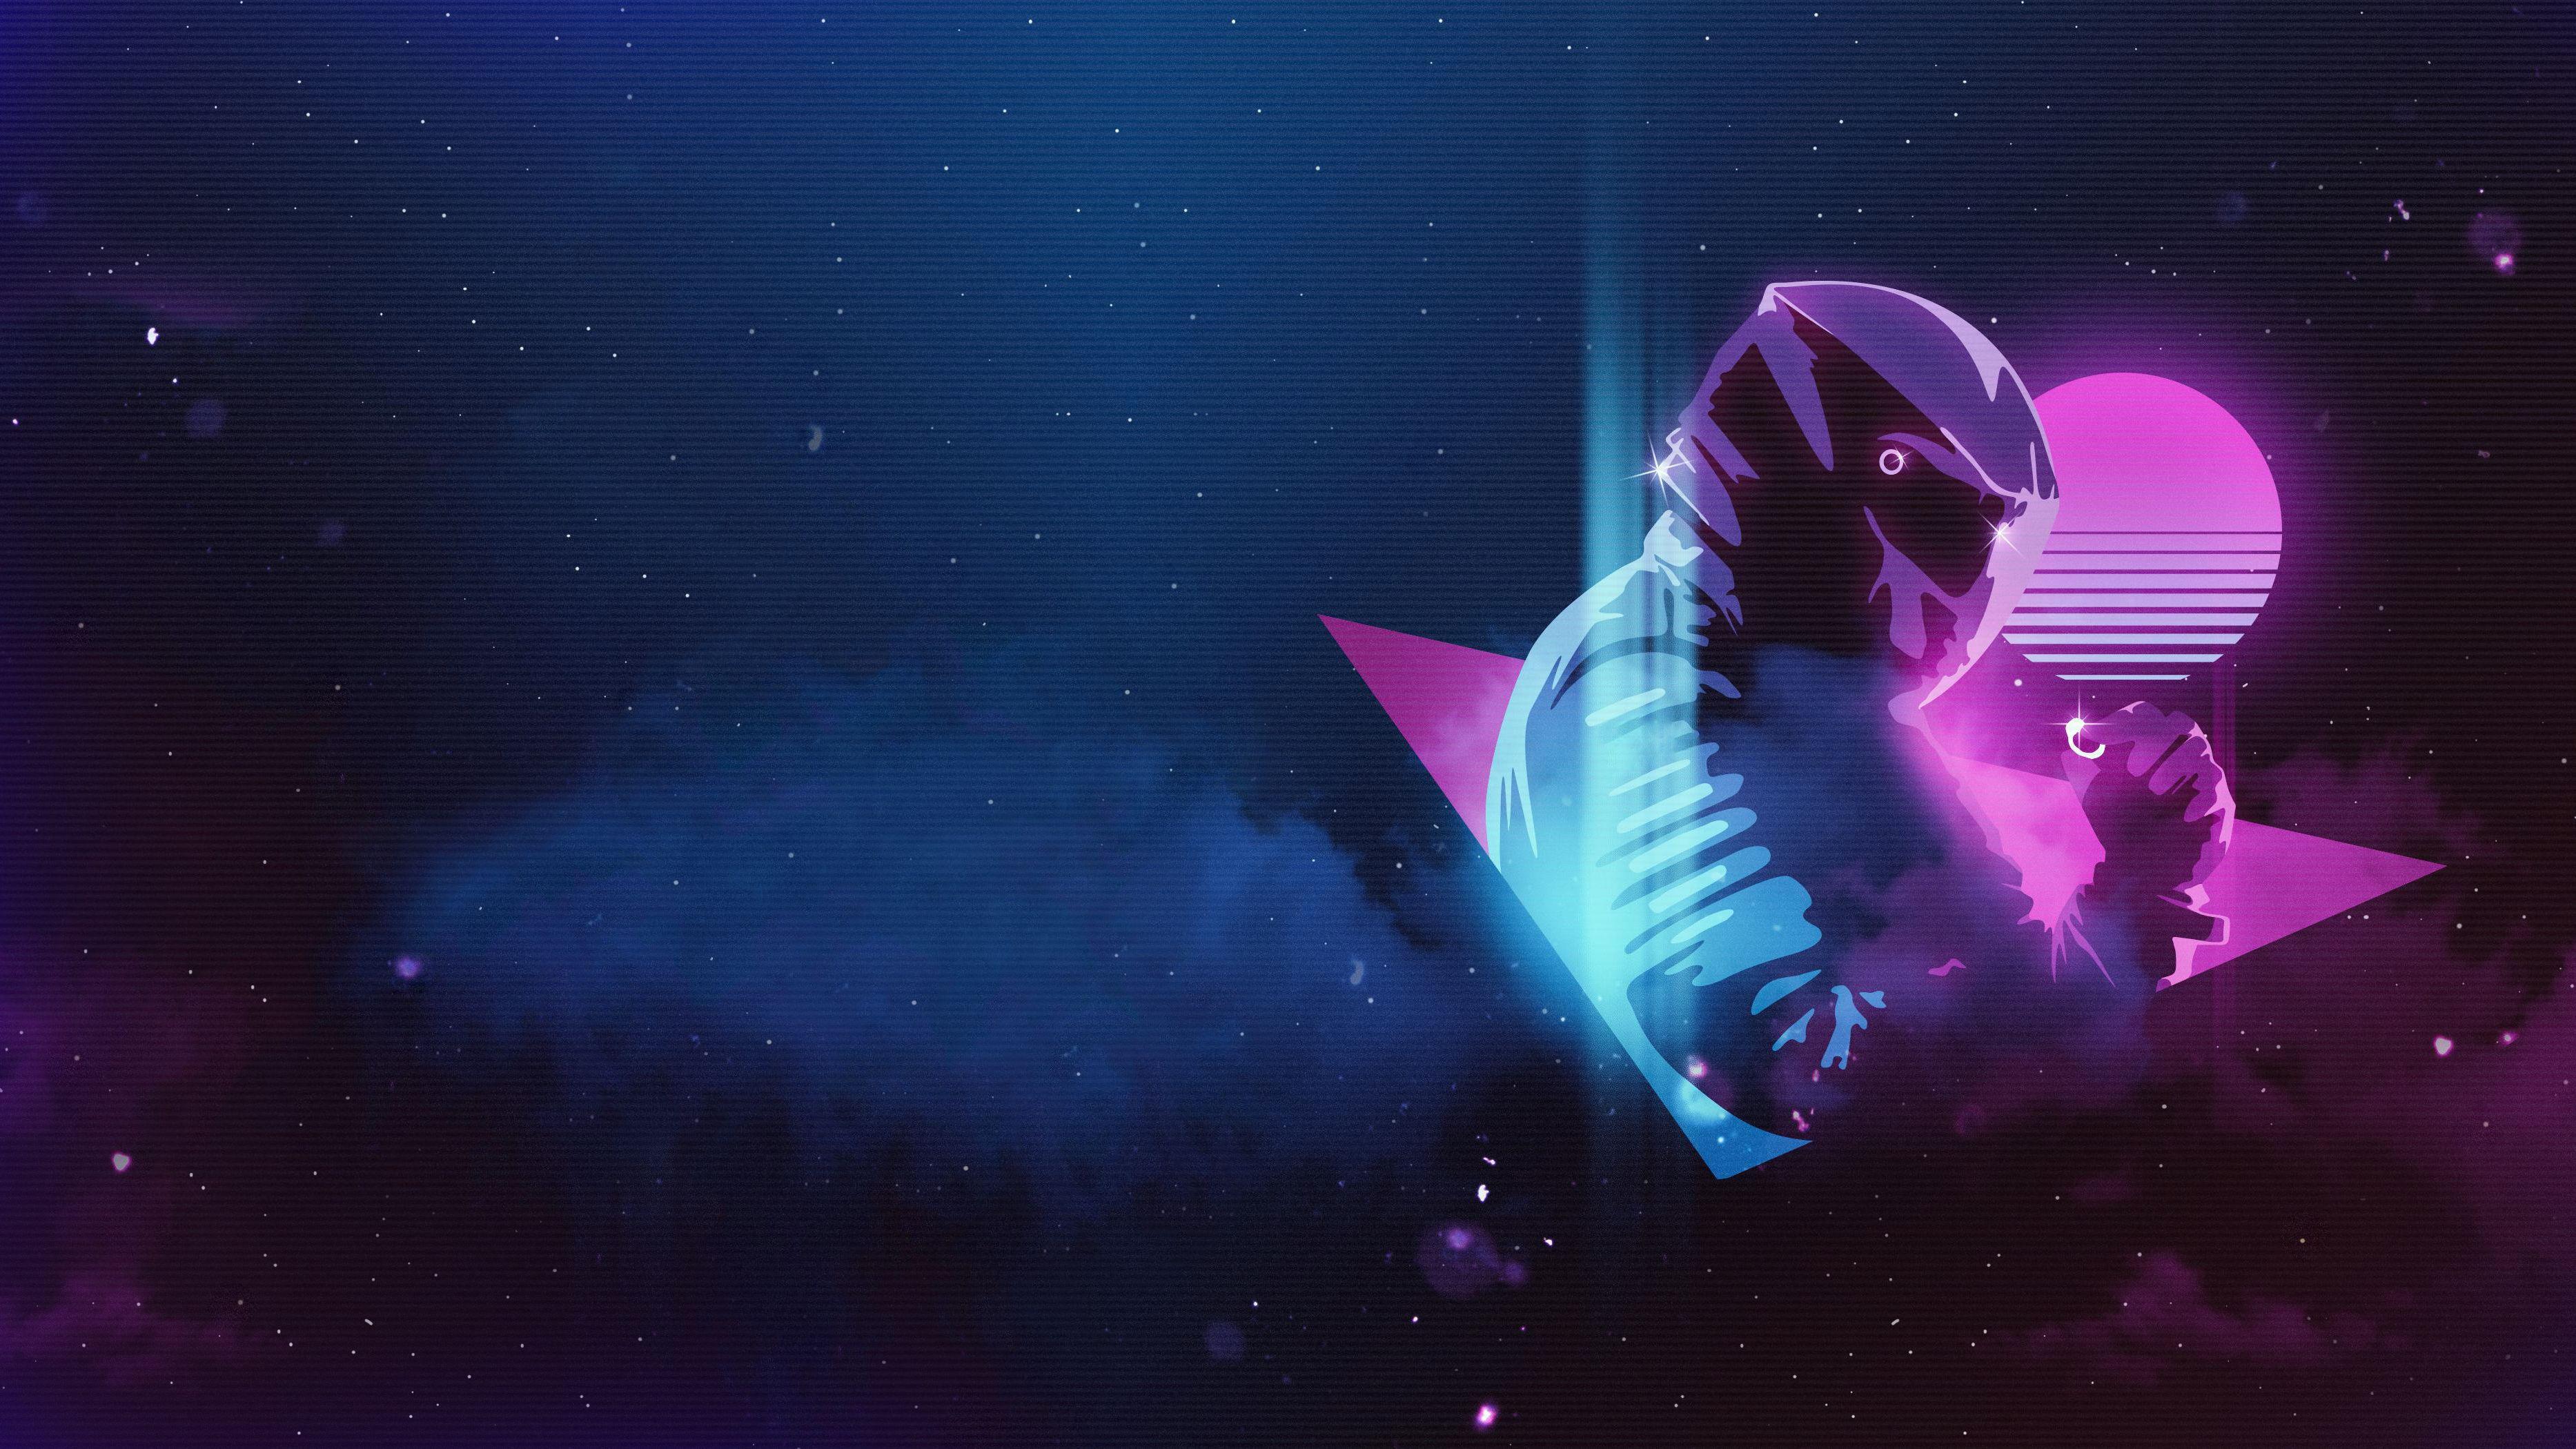 retro synthwave wave space retrowave neon wallpapers monstercat 80s 1980s pylot synth aesthetic motorcyclist scanlines nebula musician backgrounds desktop px